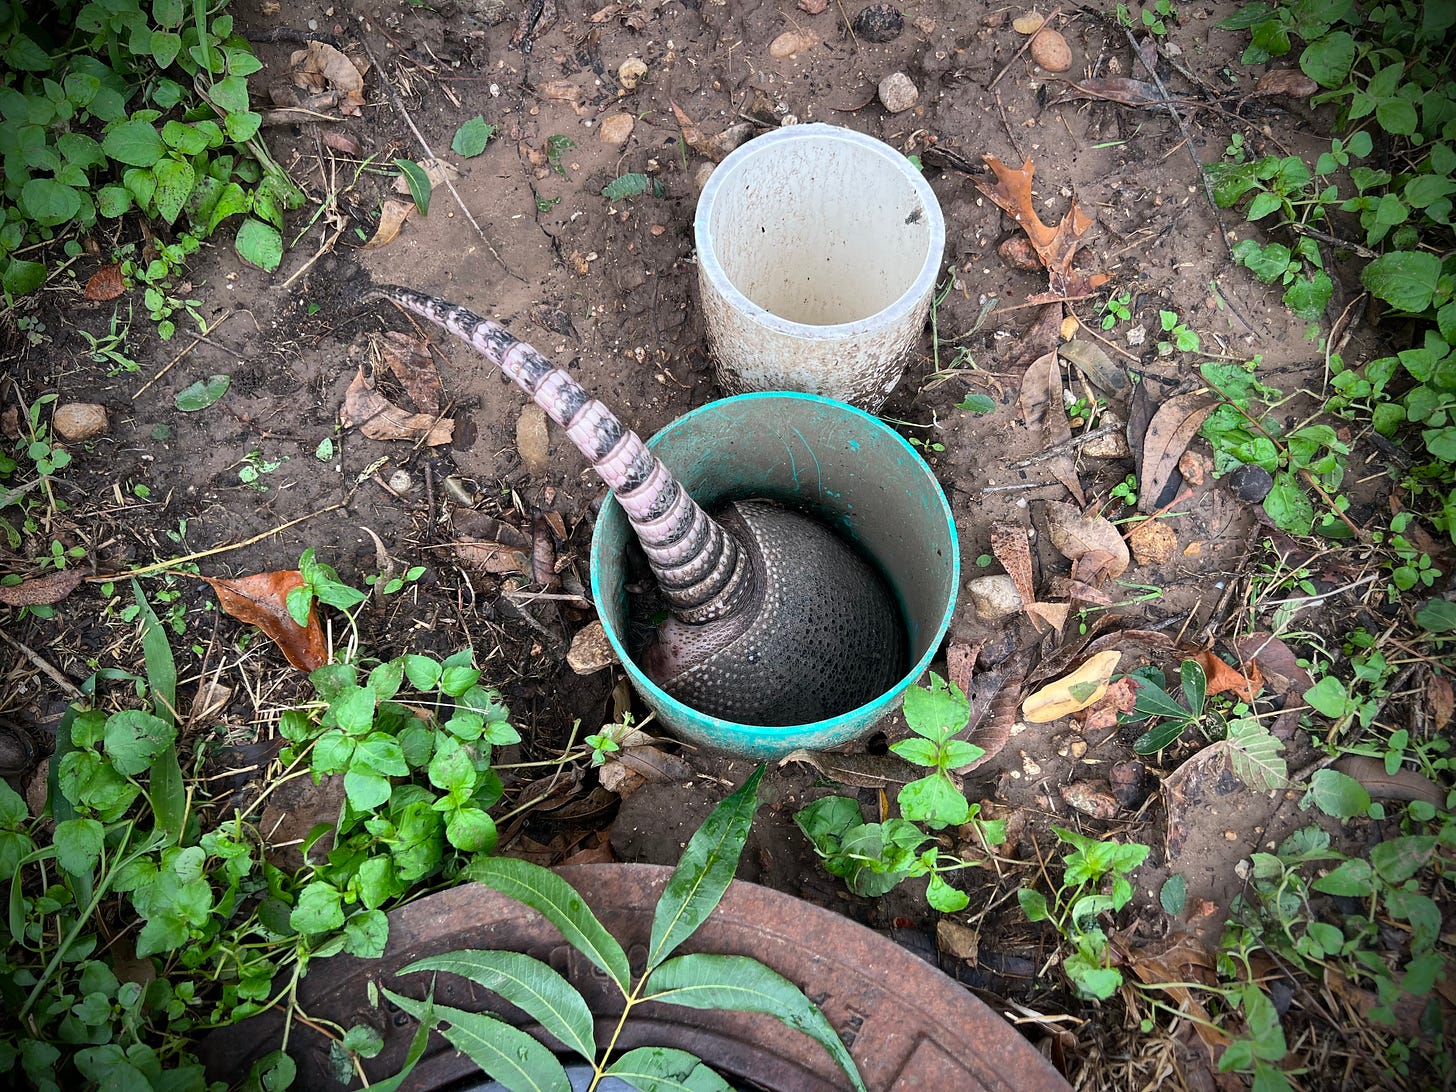 Armadillo butt and tail sticking out of PVC in a front yard